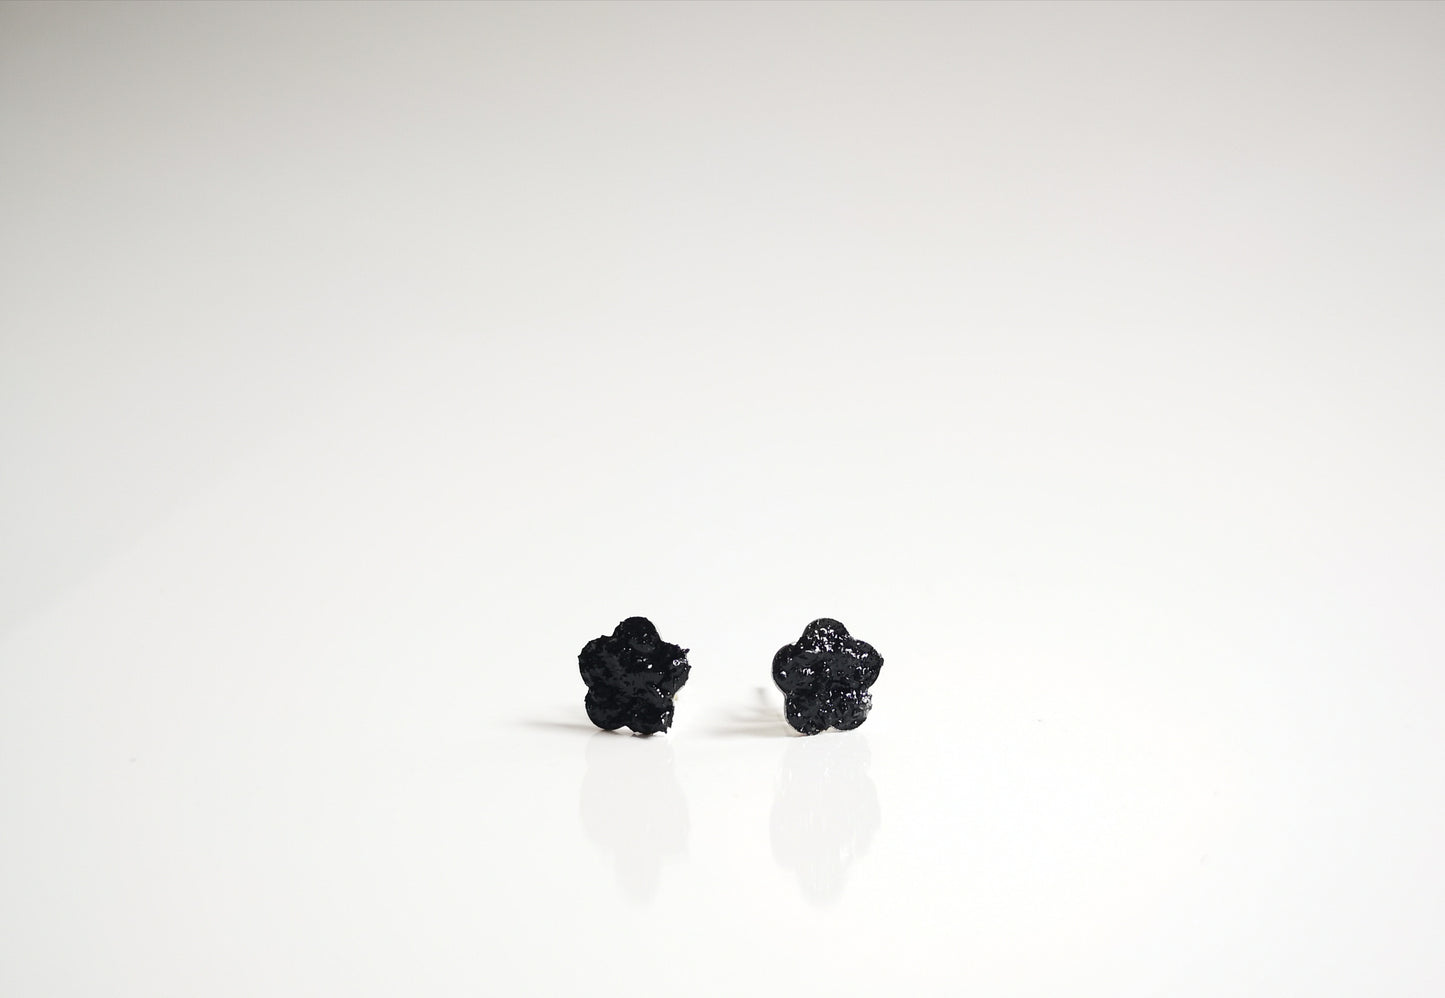 Simple and sweet small earrings Flower are perfect for spring days. Made of stainless Steel and coal. Perfect gift for girls and ladies. Handmade coal jewelry Marjeta Hribar. Kuolmi.com